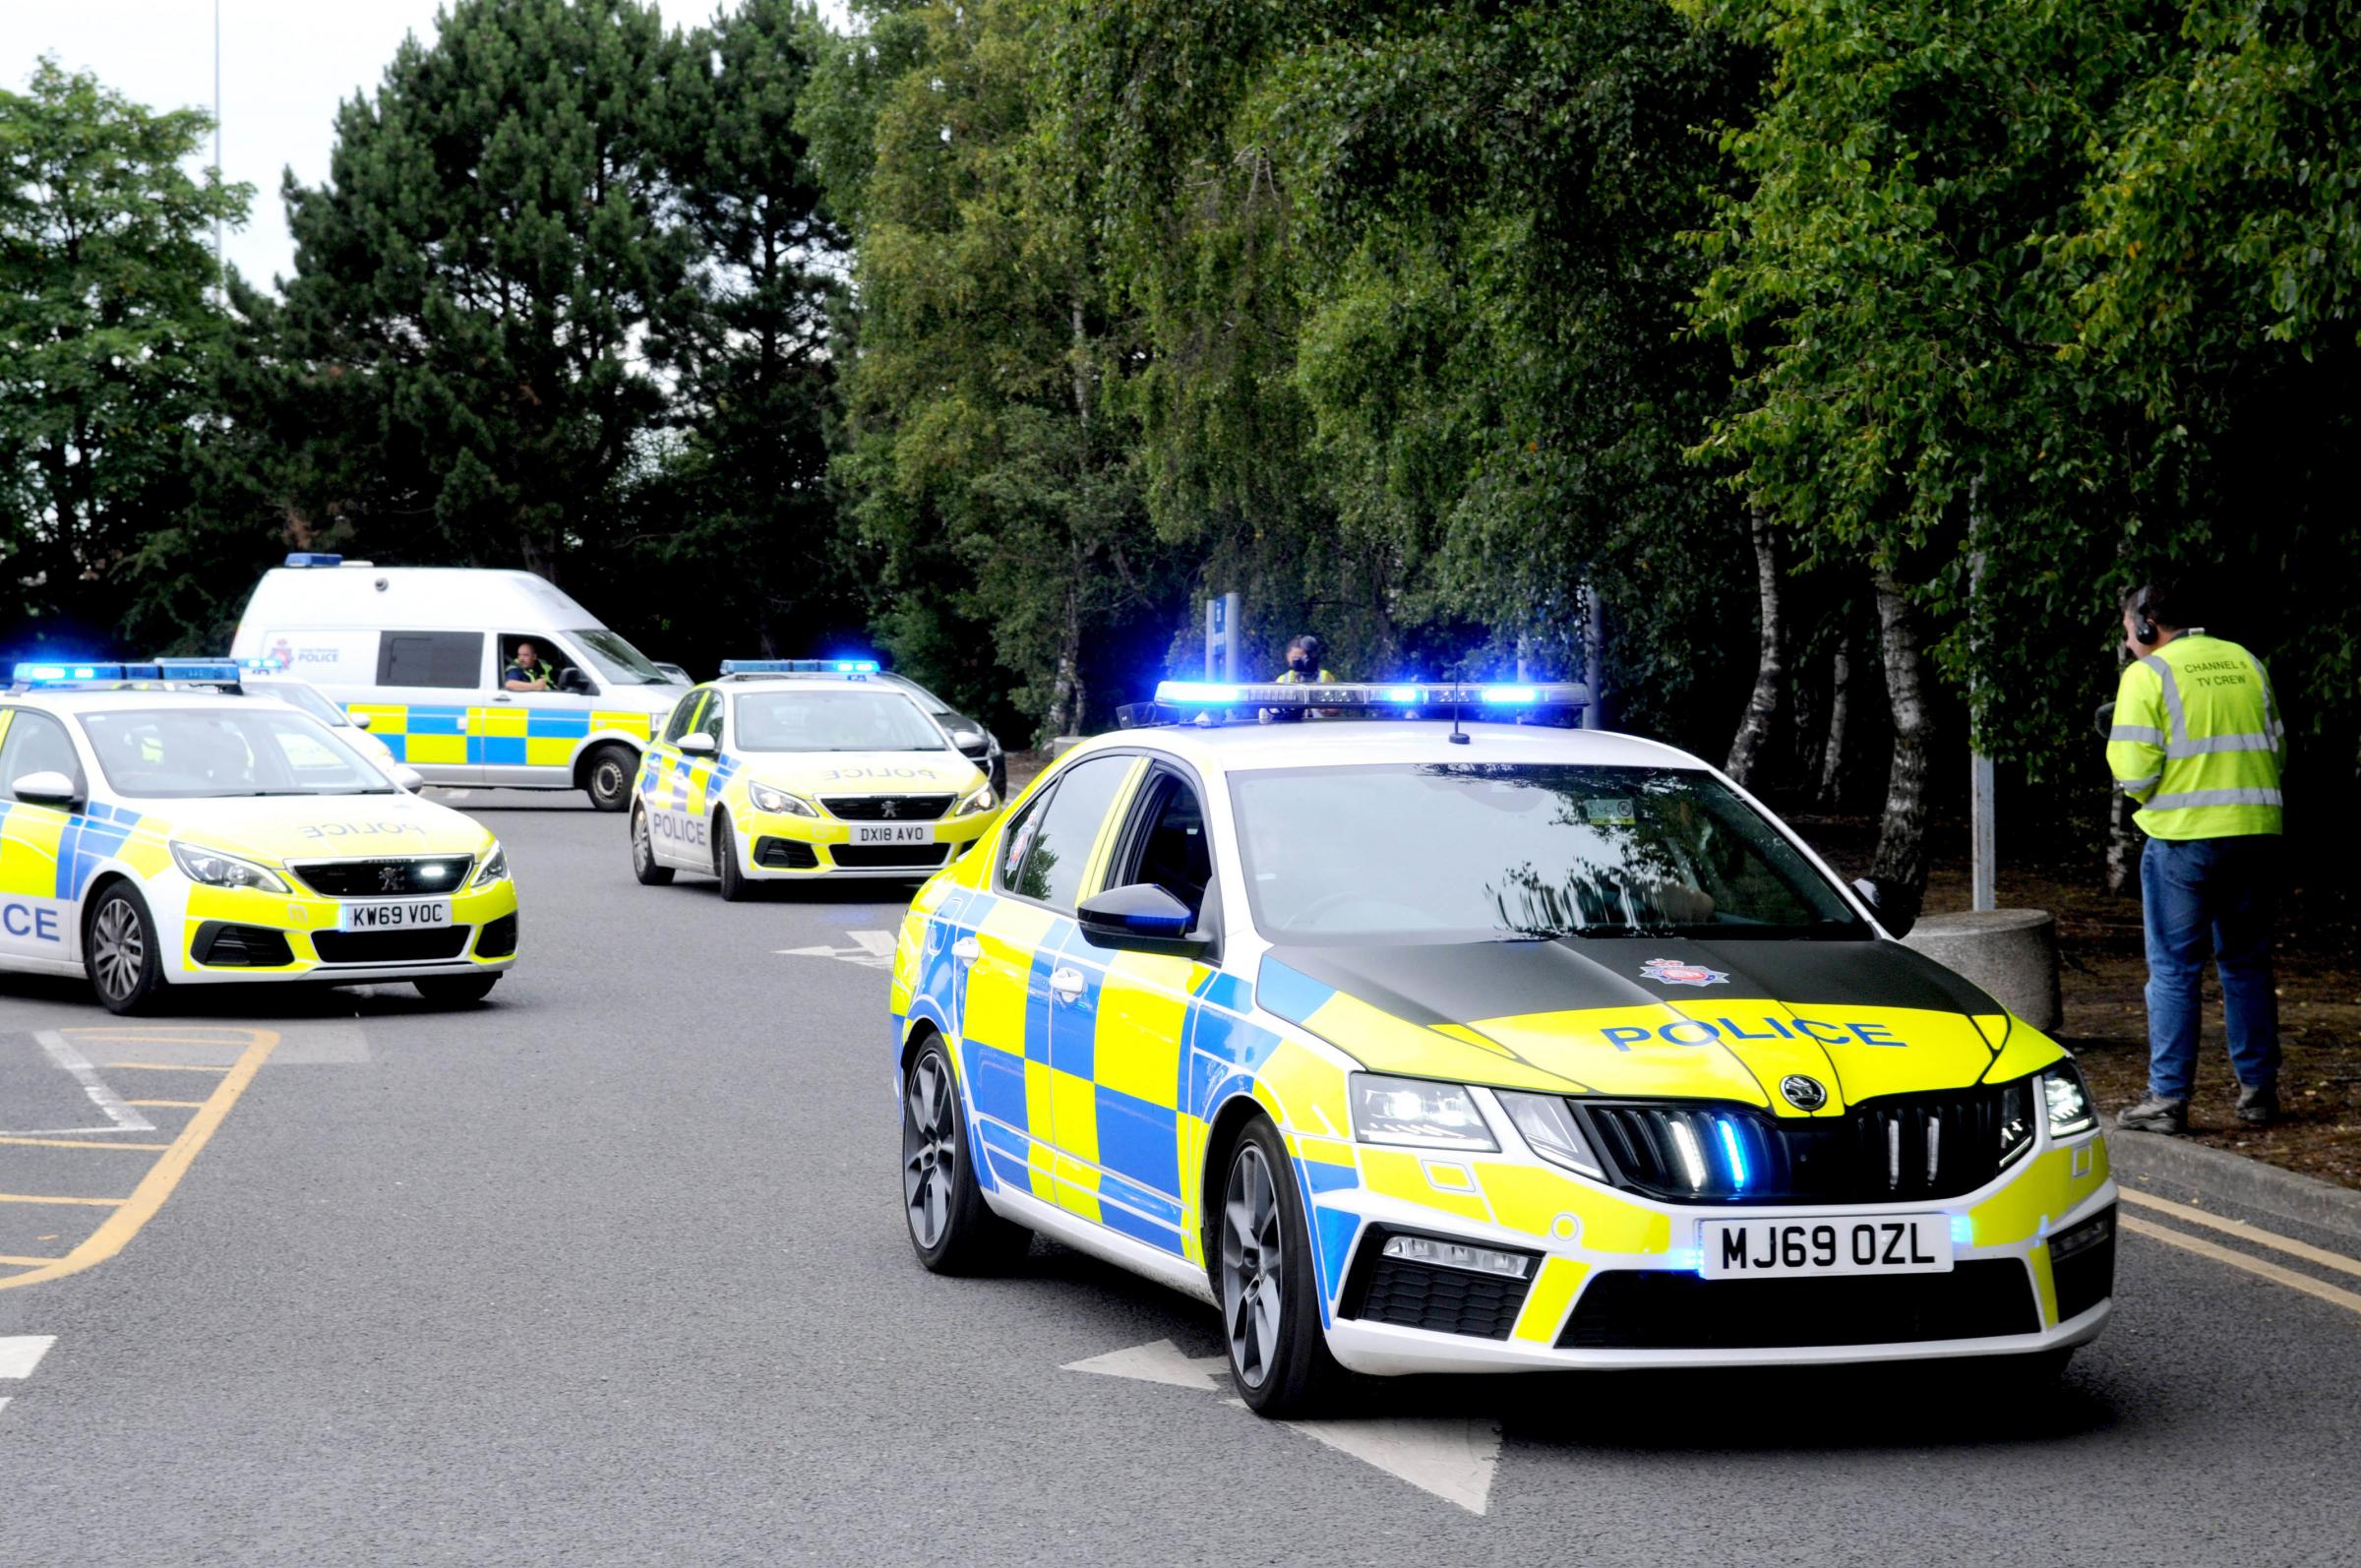 A convoy of police cars set off on the operation (Image: Dave Gillespie)